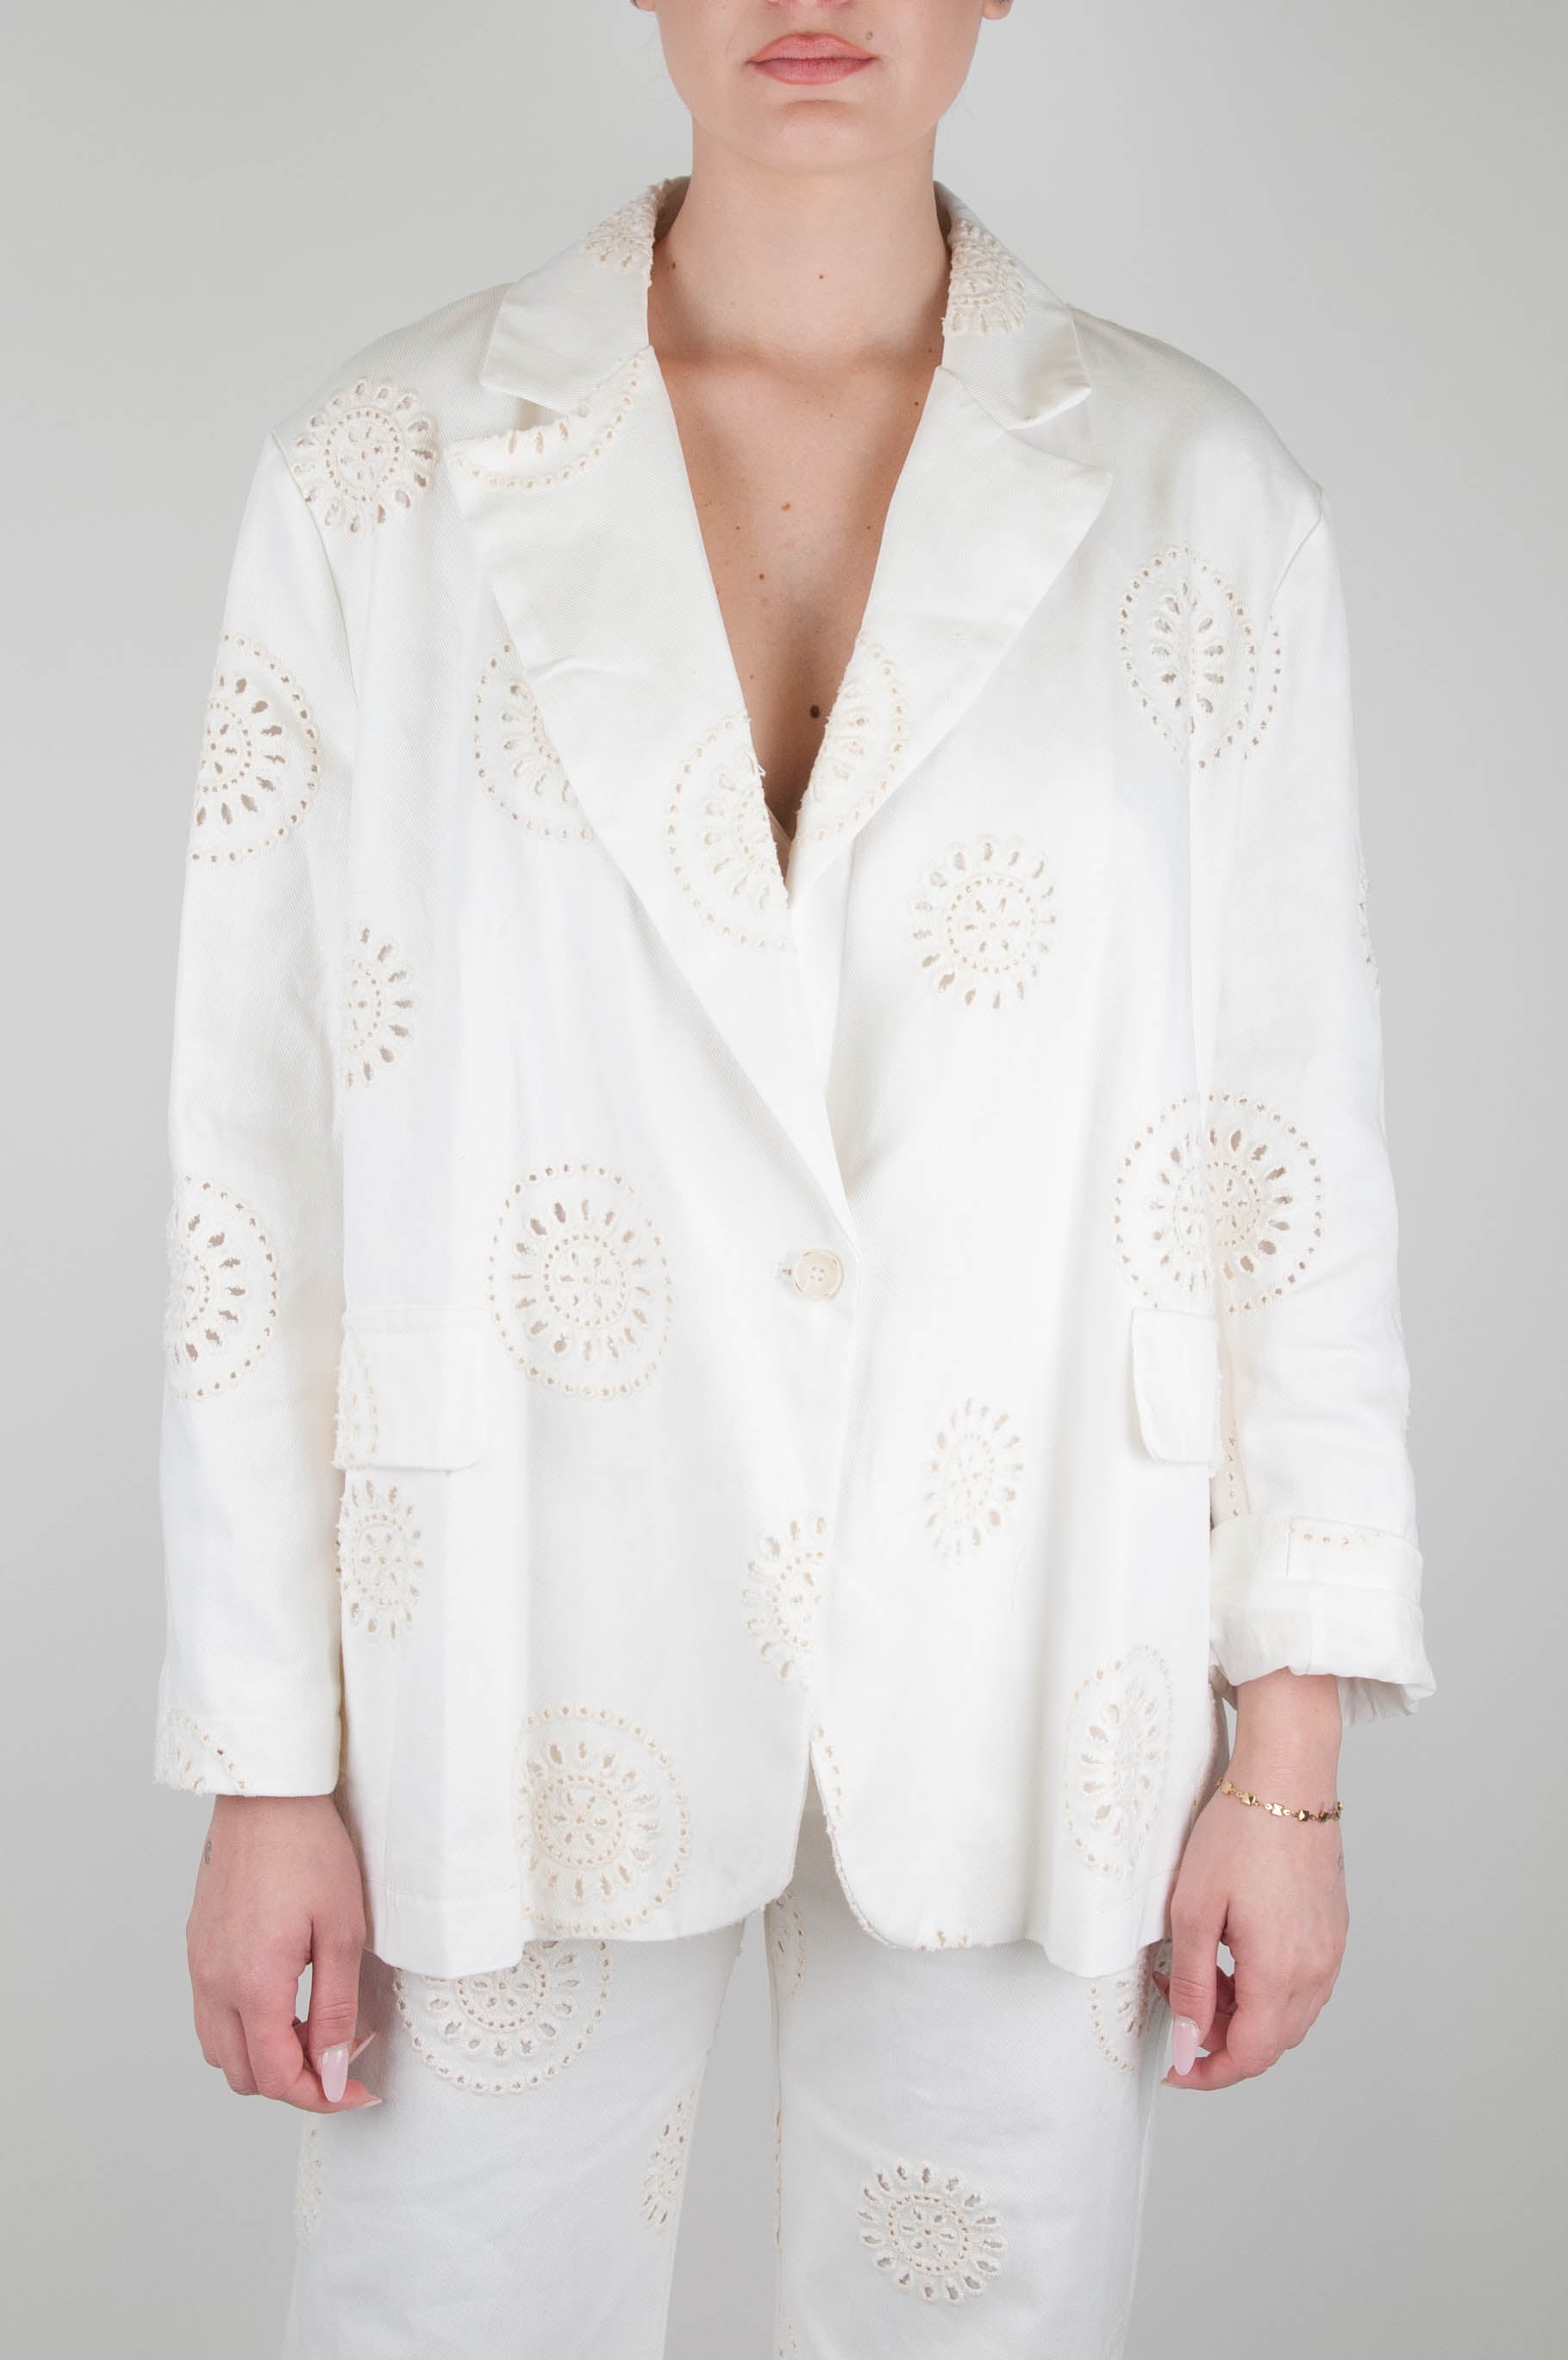 Haveone - Oversize single-breasted jacket with broderie anglaise embroidery